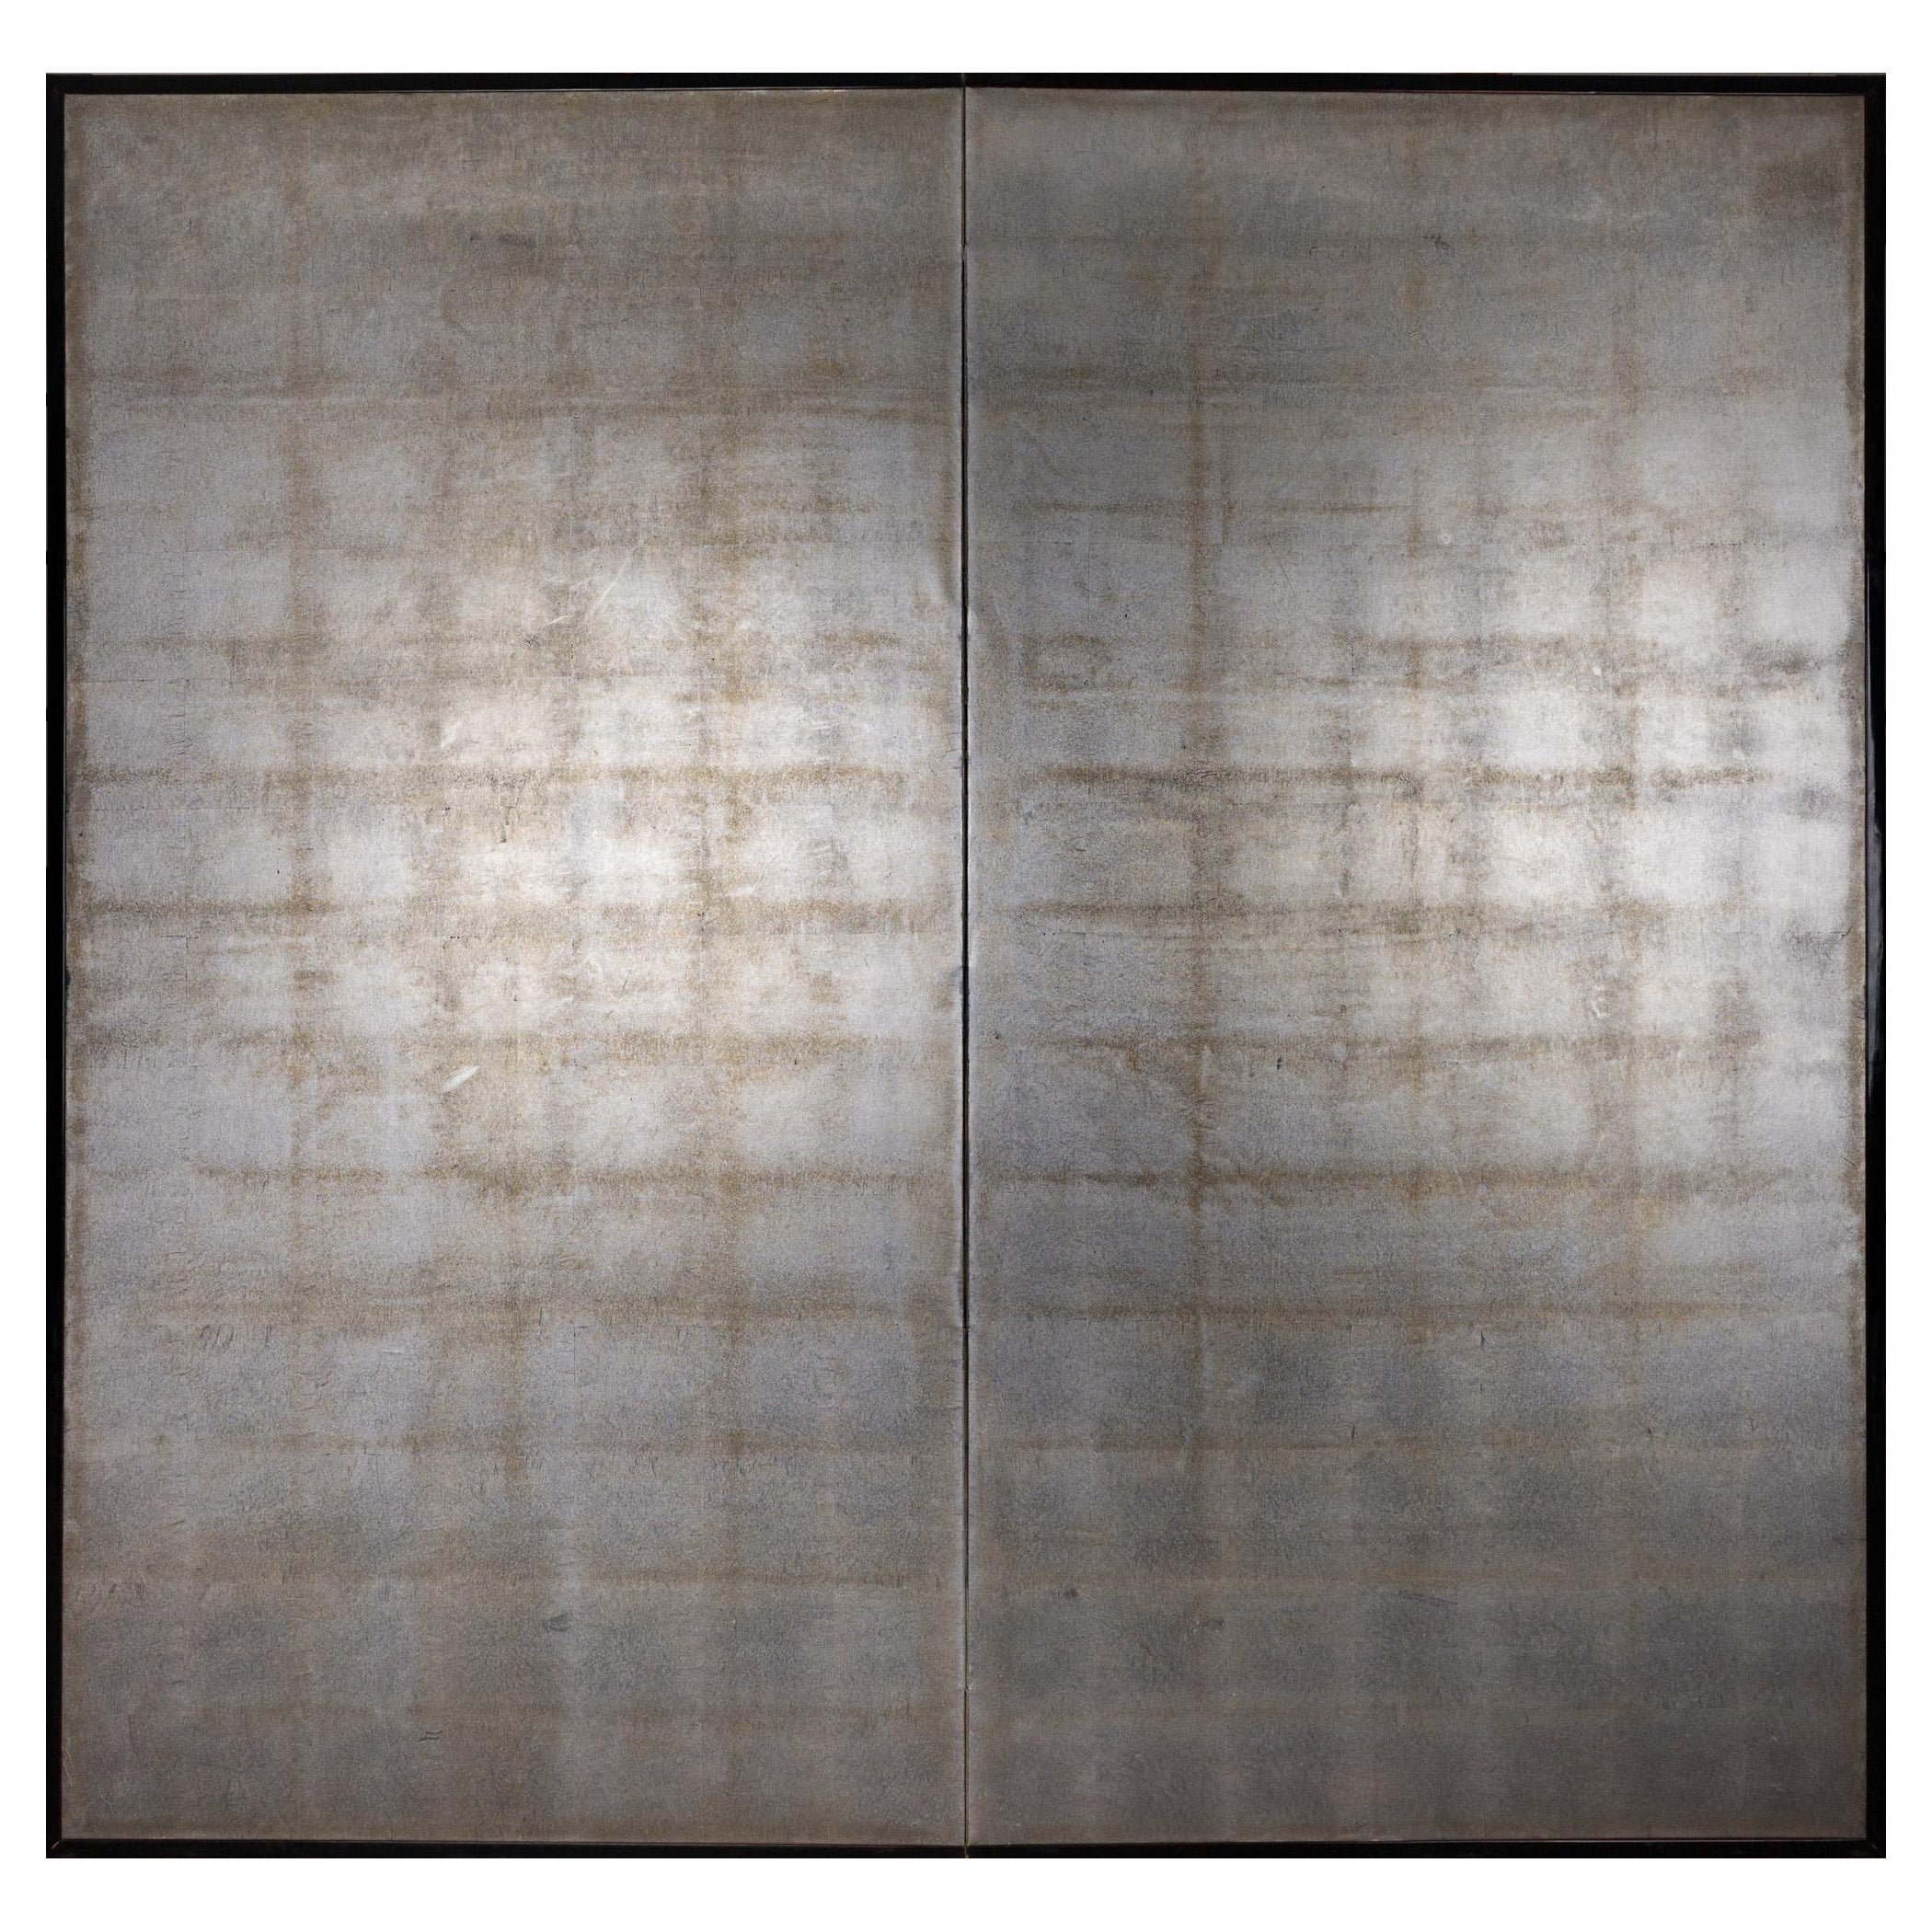 Japanese Two Panel Screen: Plain Silver Leaf on Paper